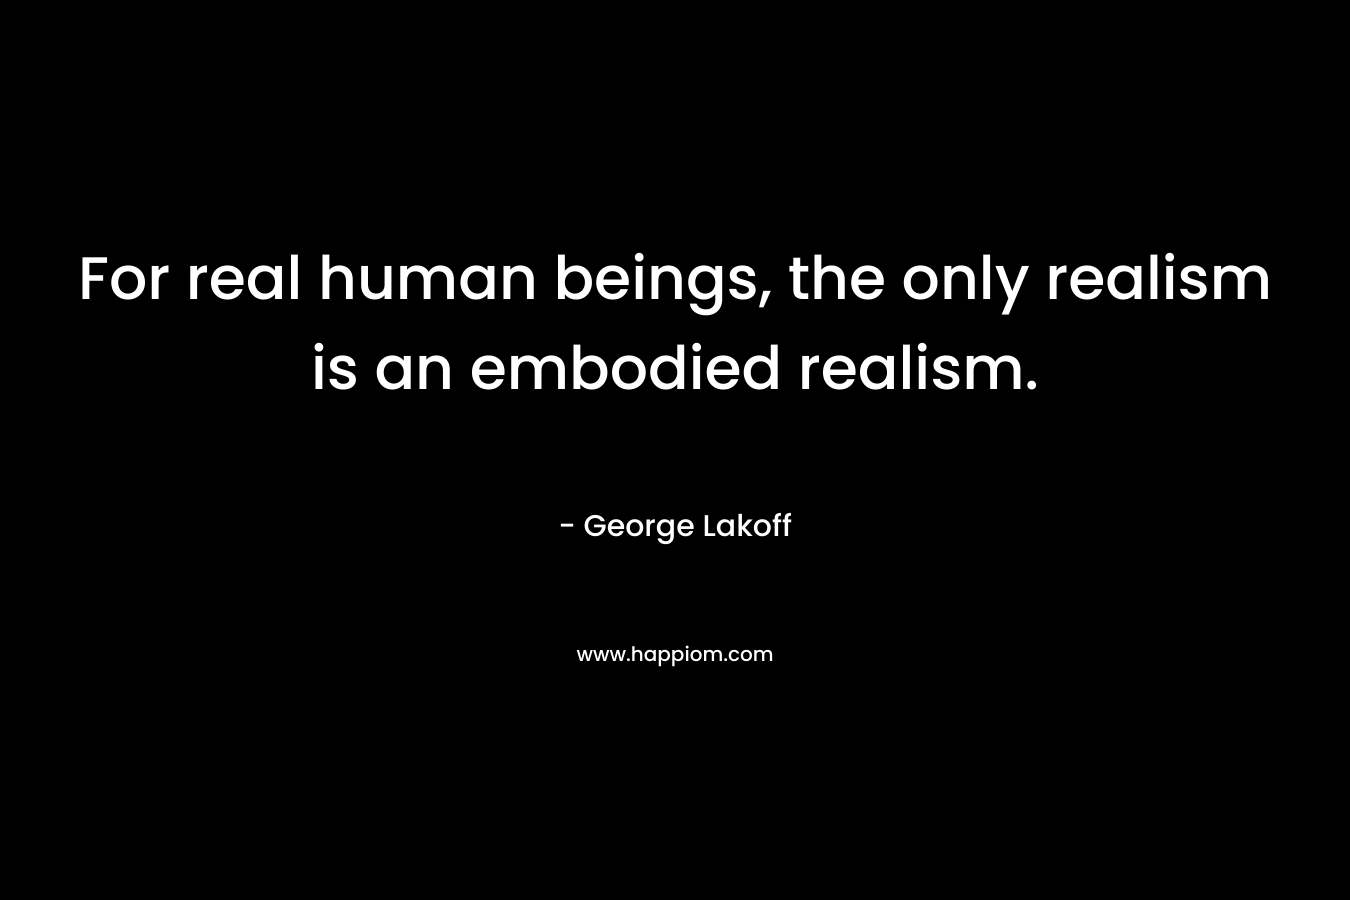 For real human beings, the only realism is an embodied realism.